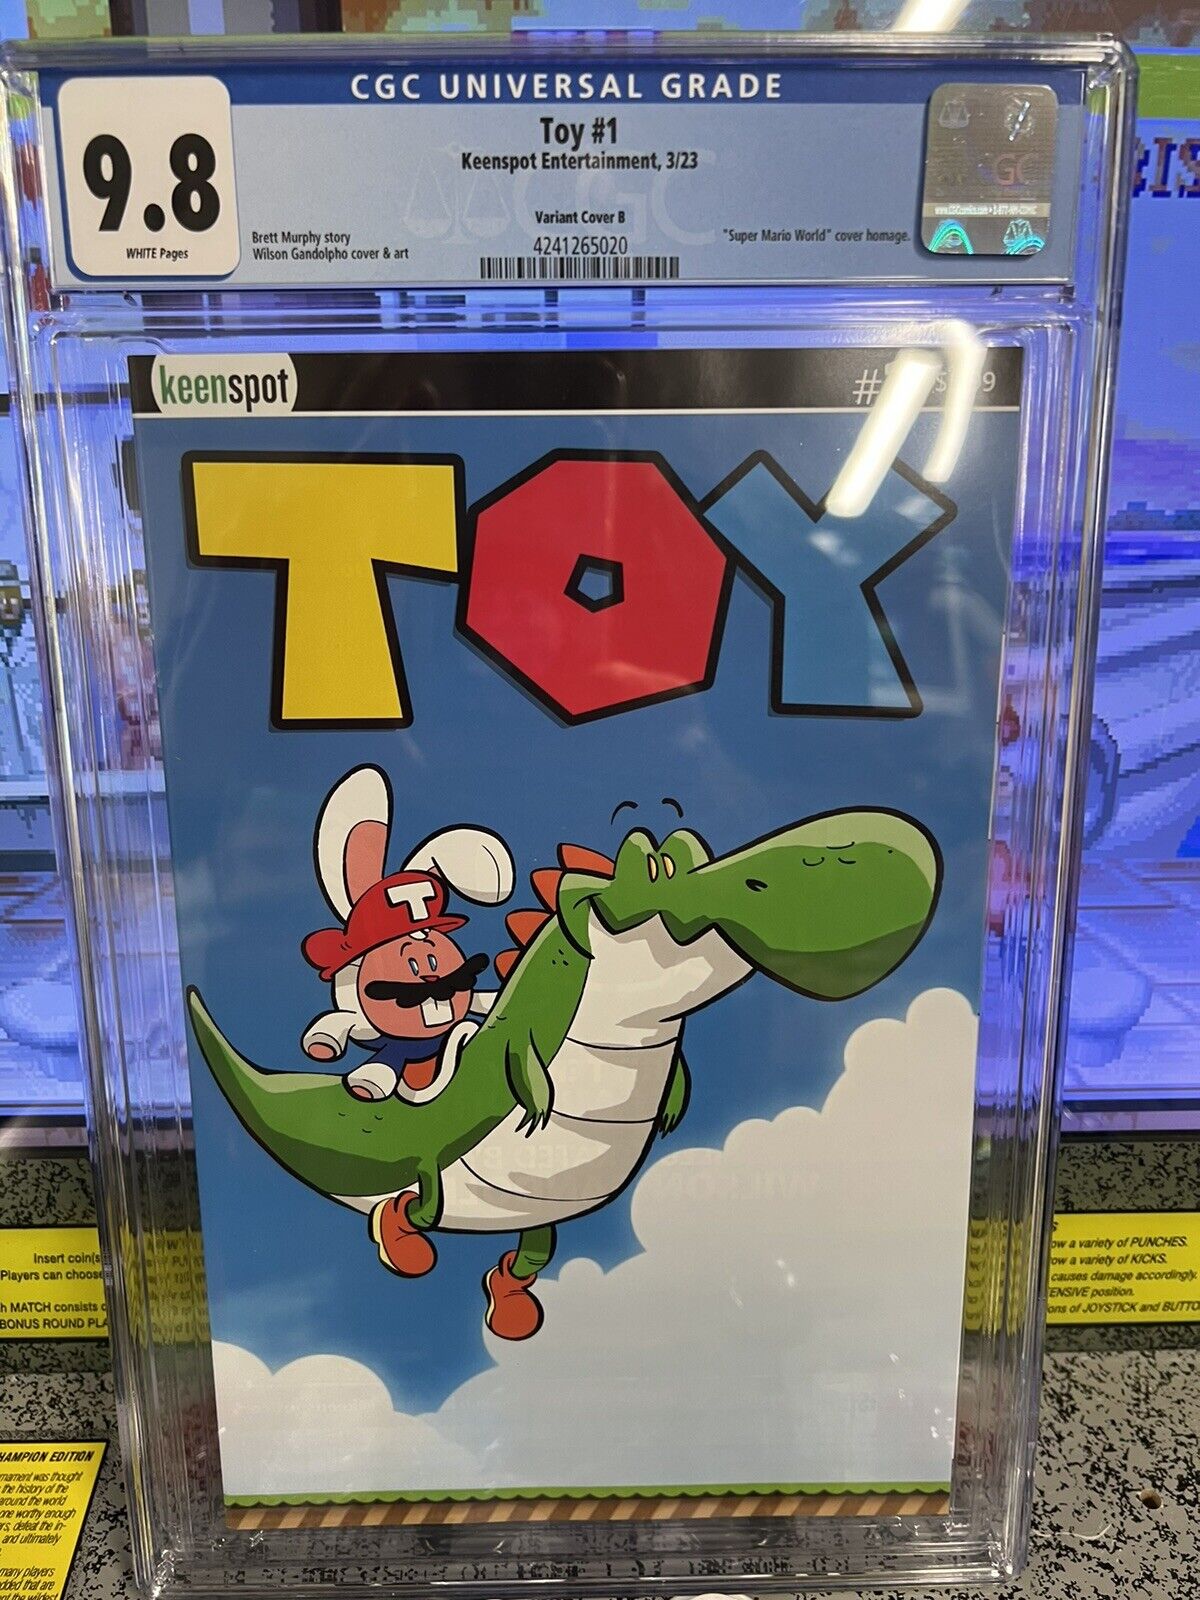 2023 Keenspot Toy #1 CGC 9.8 Super Mario World Yoshi Homage Cover Only 1250